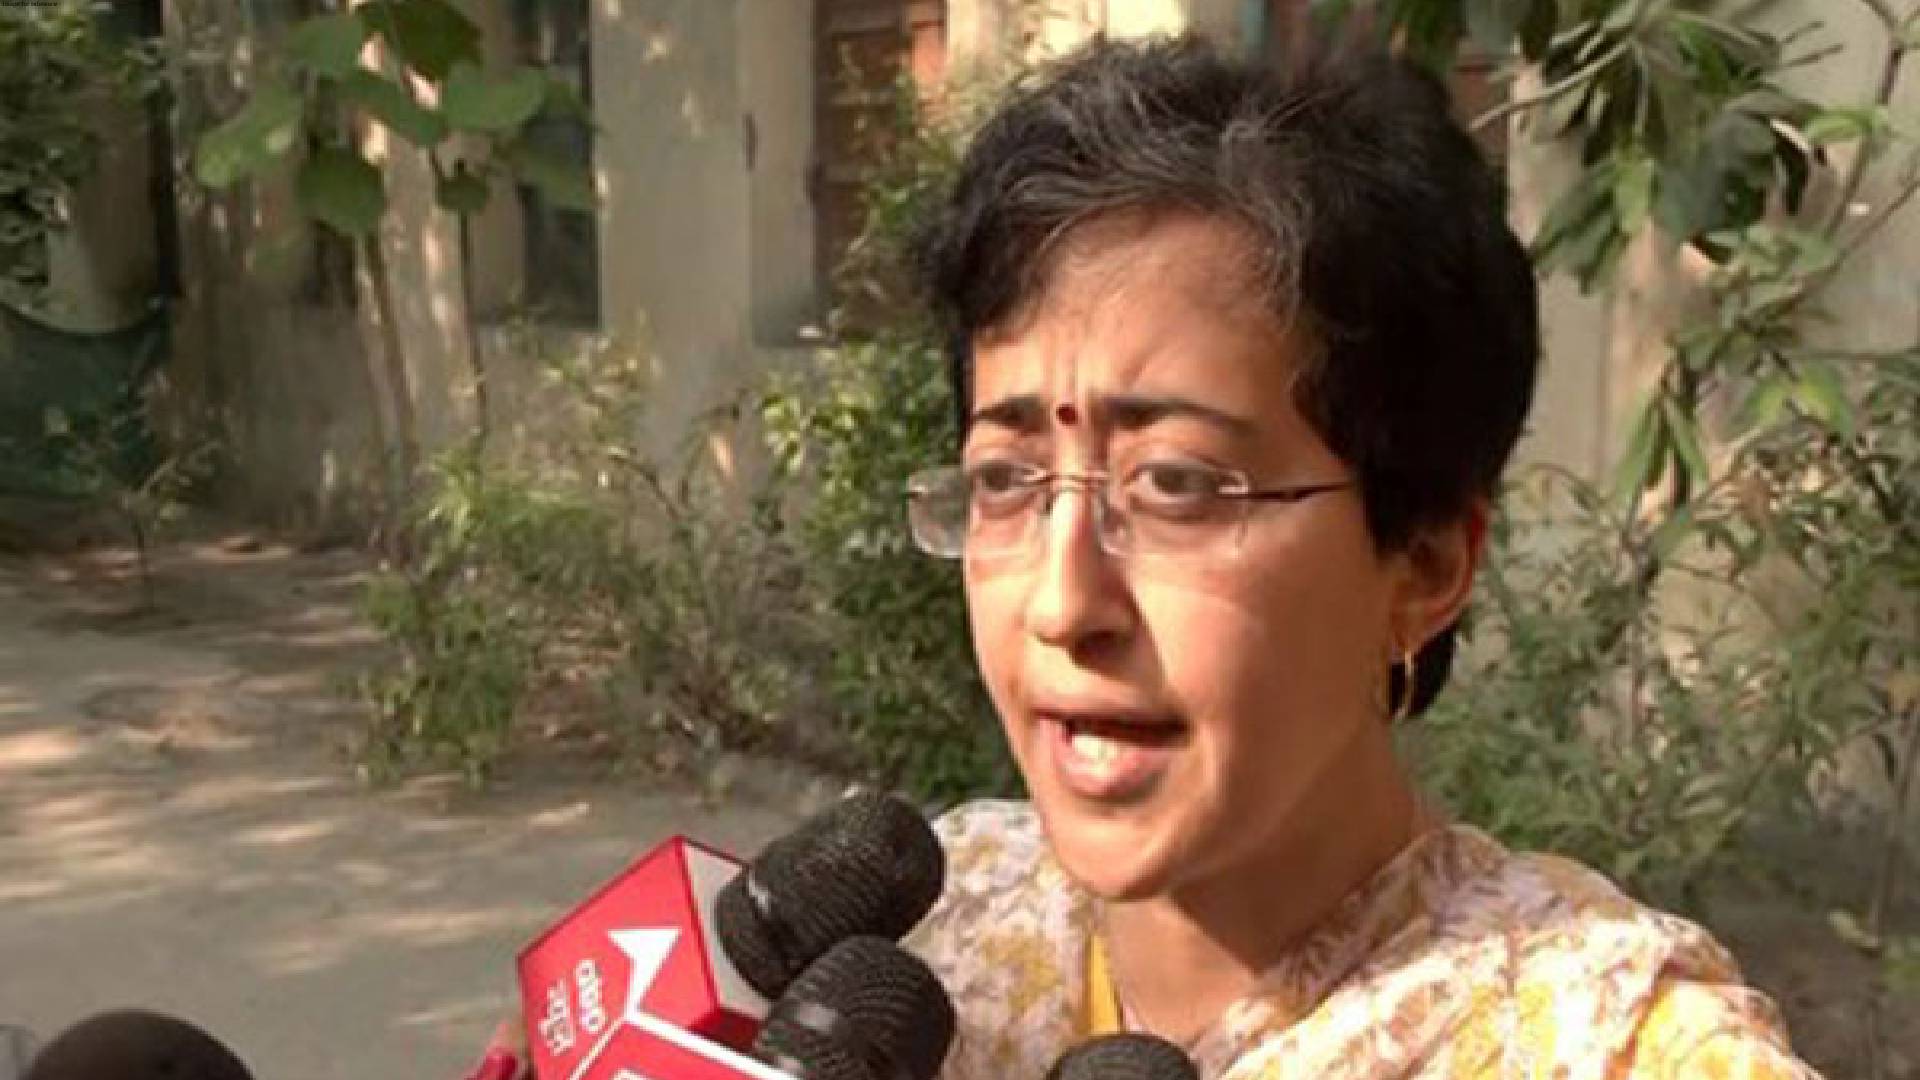 AAP's Atishi casts her vote in Delhi, alleges voting could be slowed down in INDIA bloc strongholds